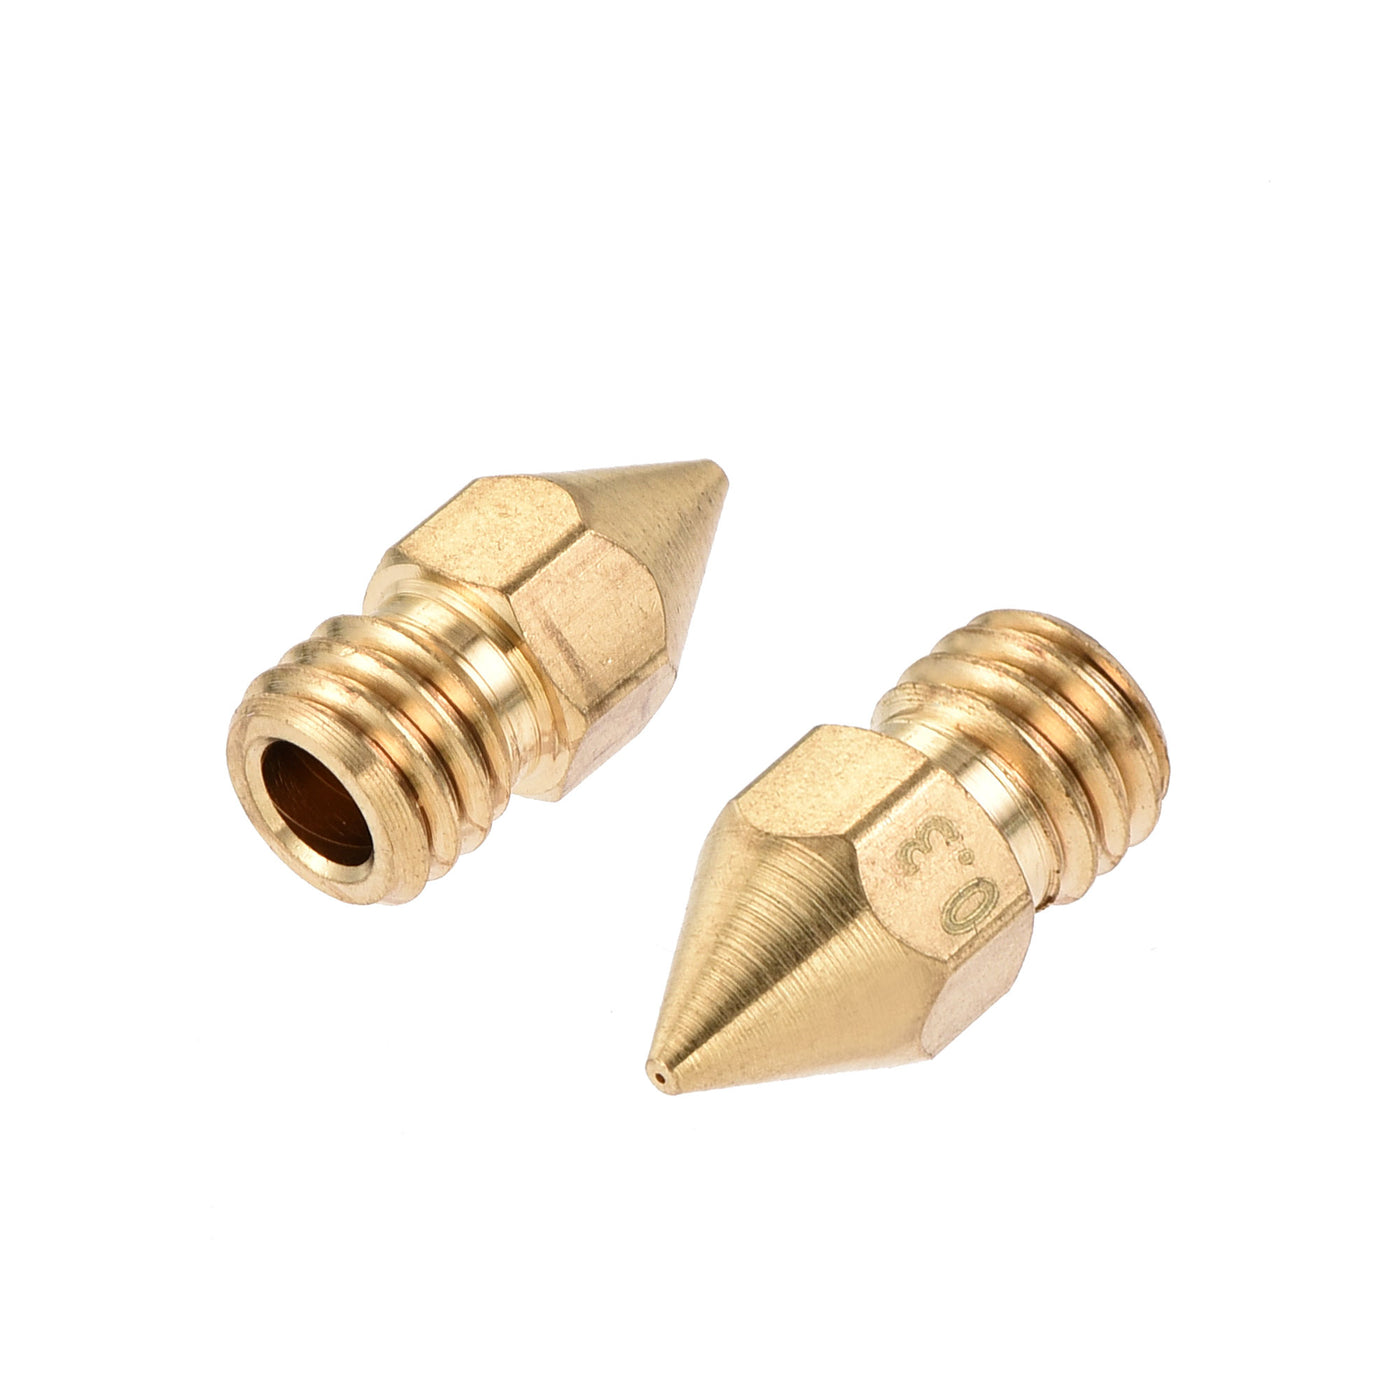 uxcell Uxcell 0.3mm 3D Printer Nozzle, 18pcs M6 Thread for MK8 3mm Extruder Print, Brass